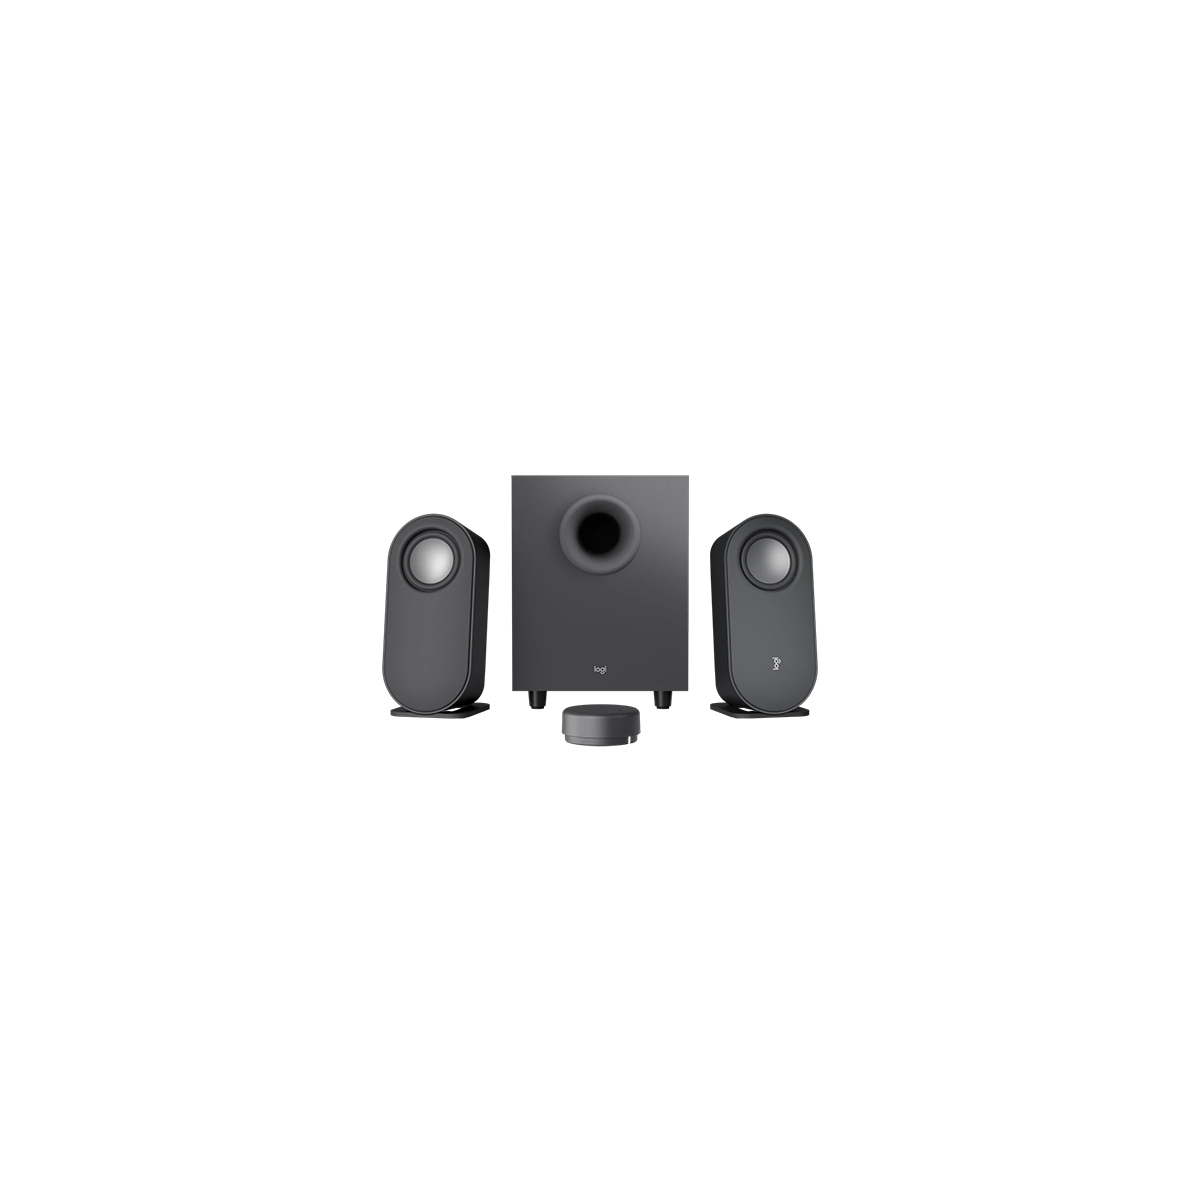 Logitech Z407 Bluetooth Computer Speakers with Subwoofer and Wireless  Control, Immersive Sound, Premium Audio with Multiple Inputs, USB Speakers